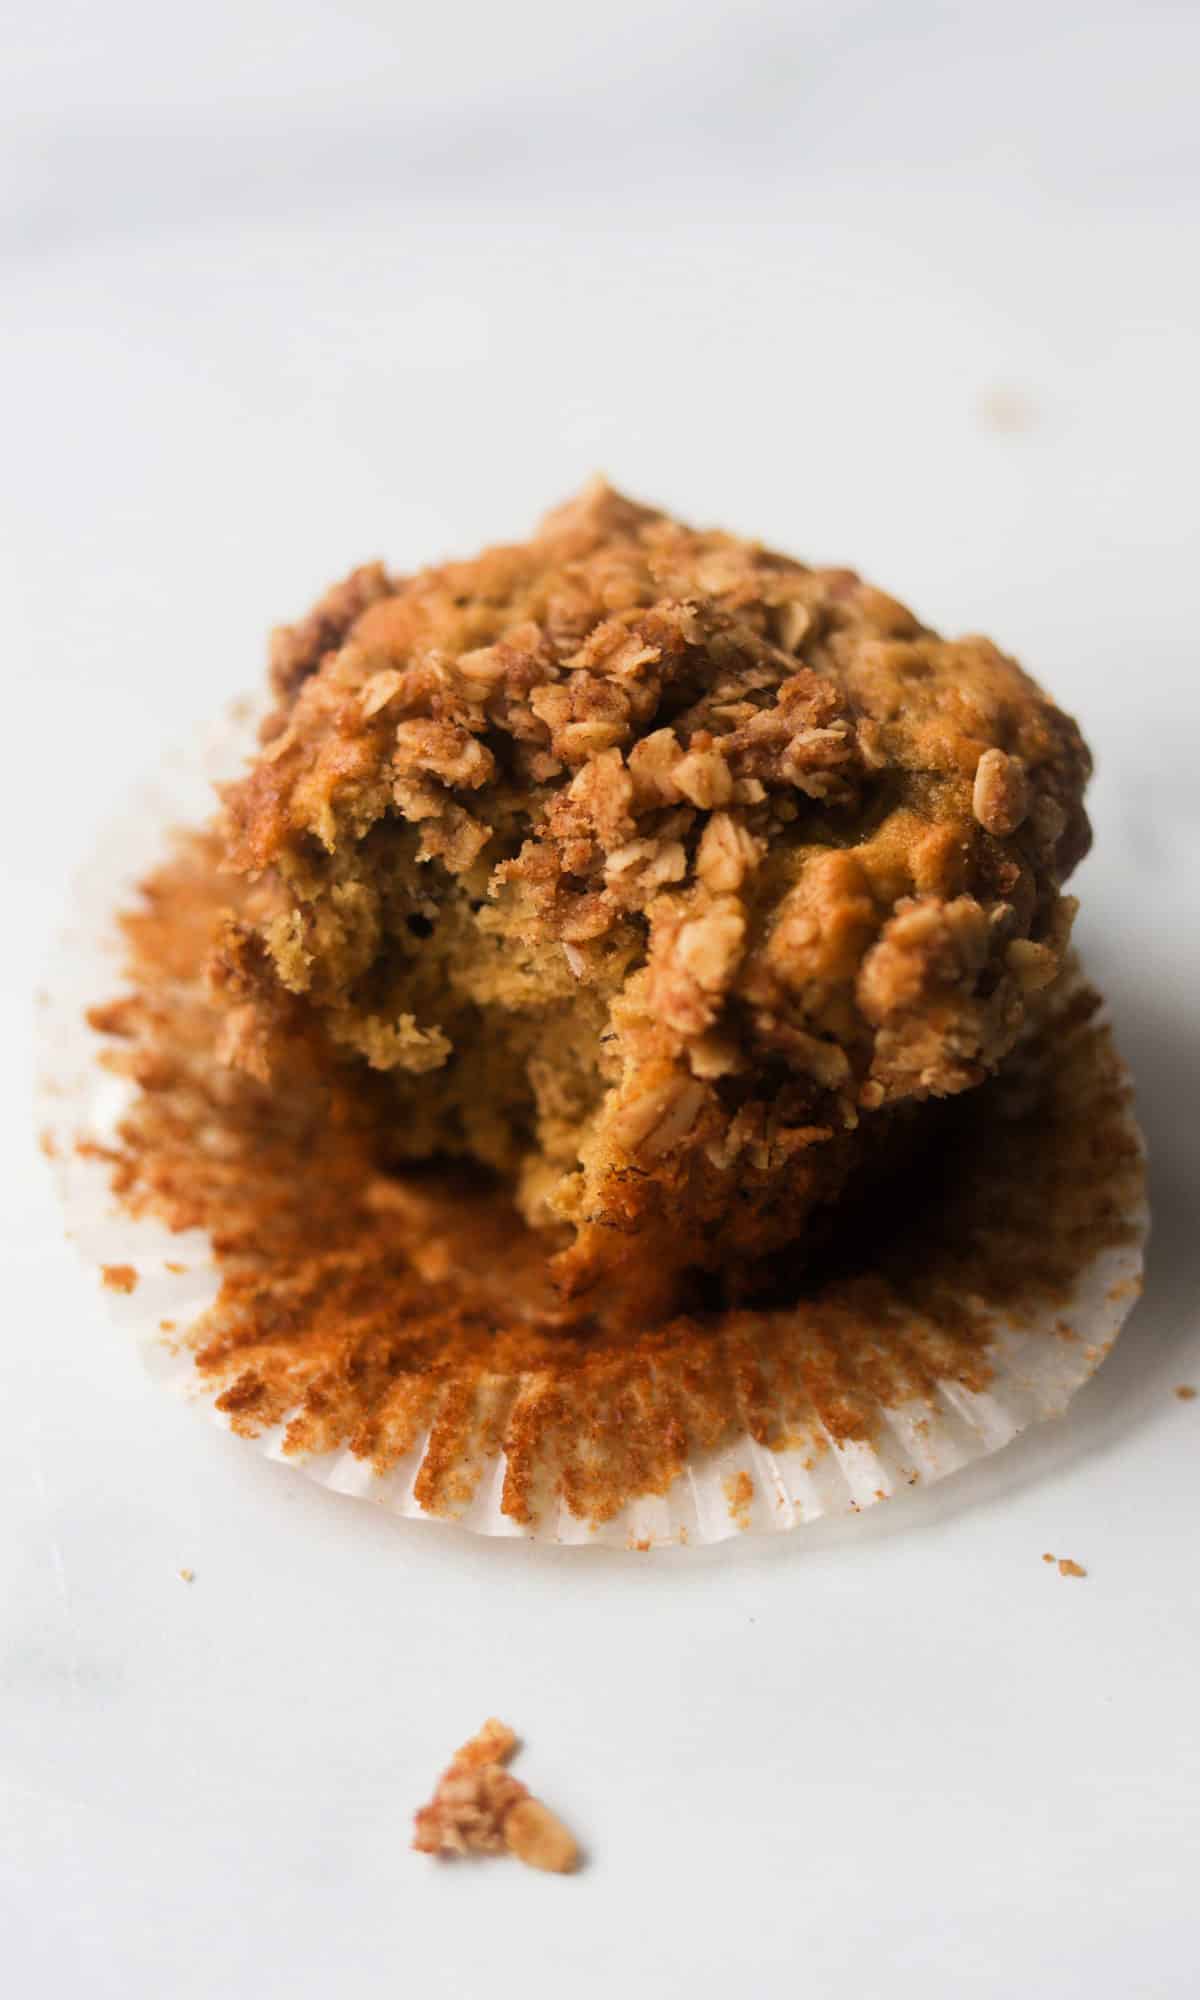 A side shot of a muffin with a bite taken out of it.